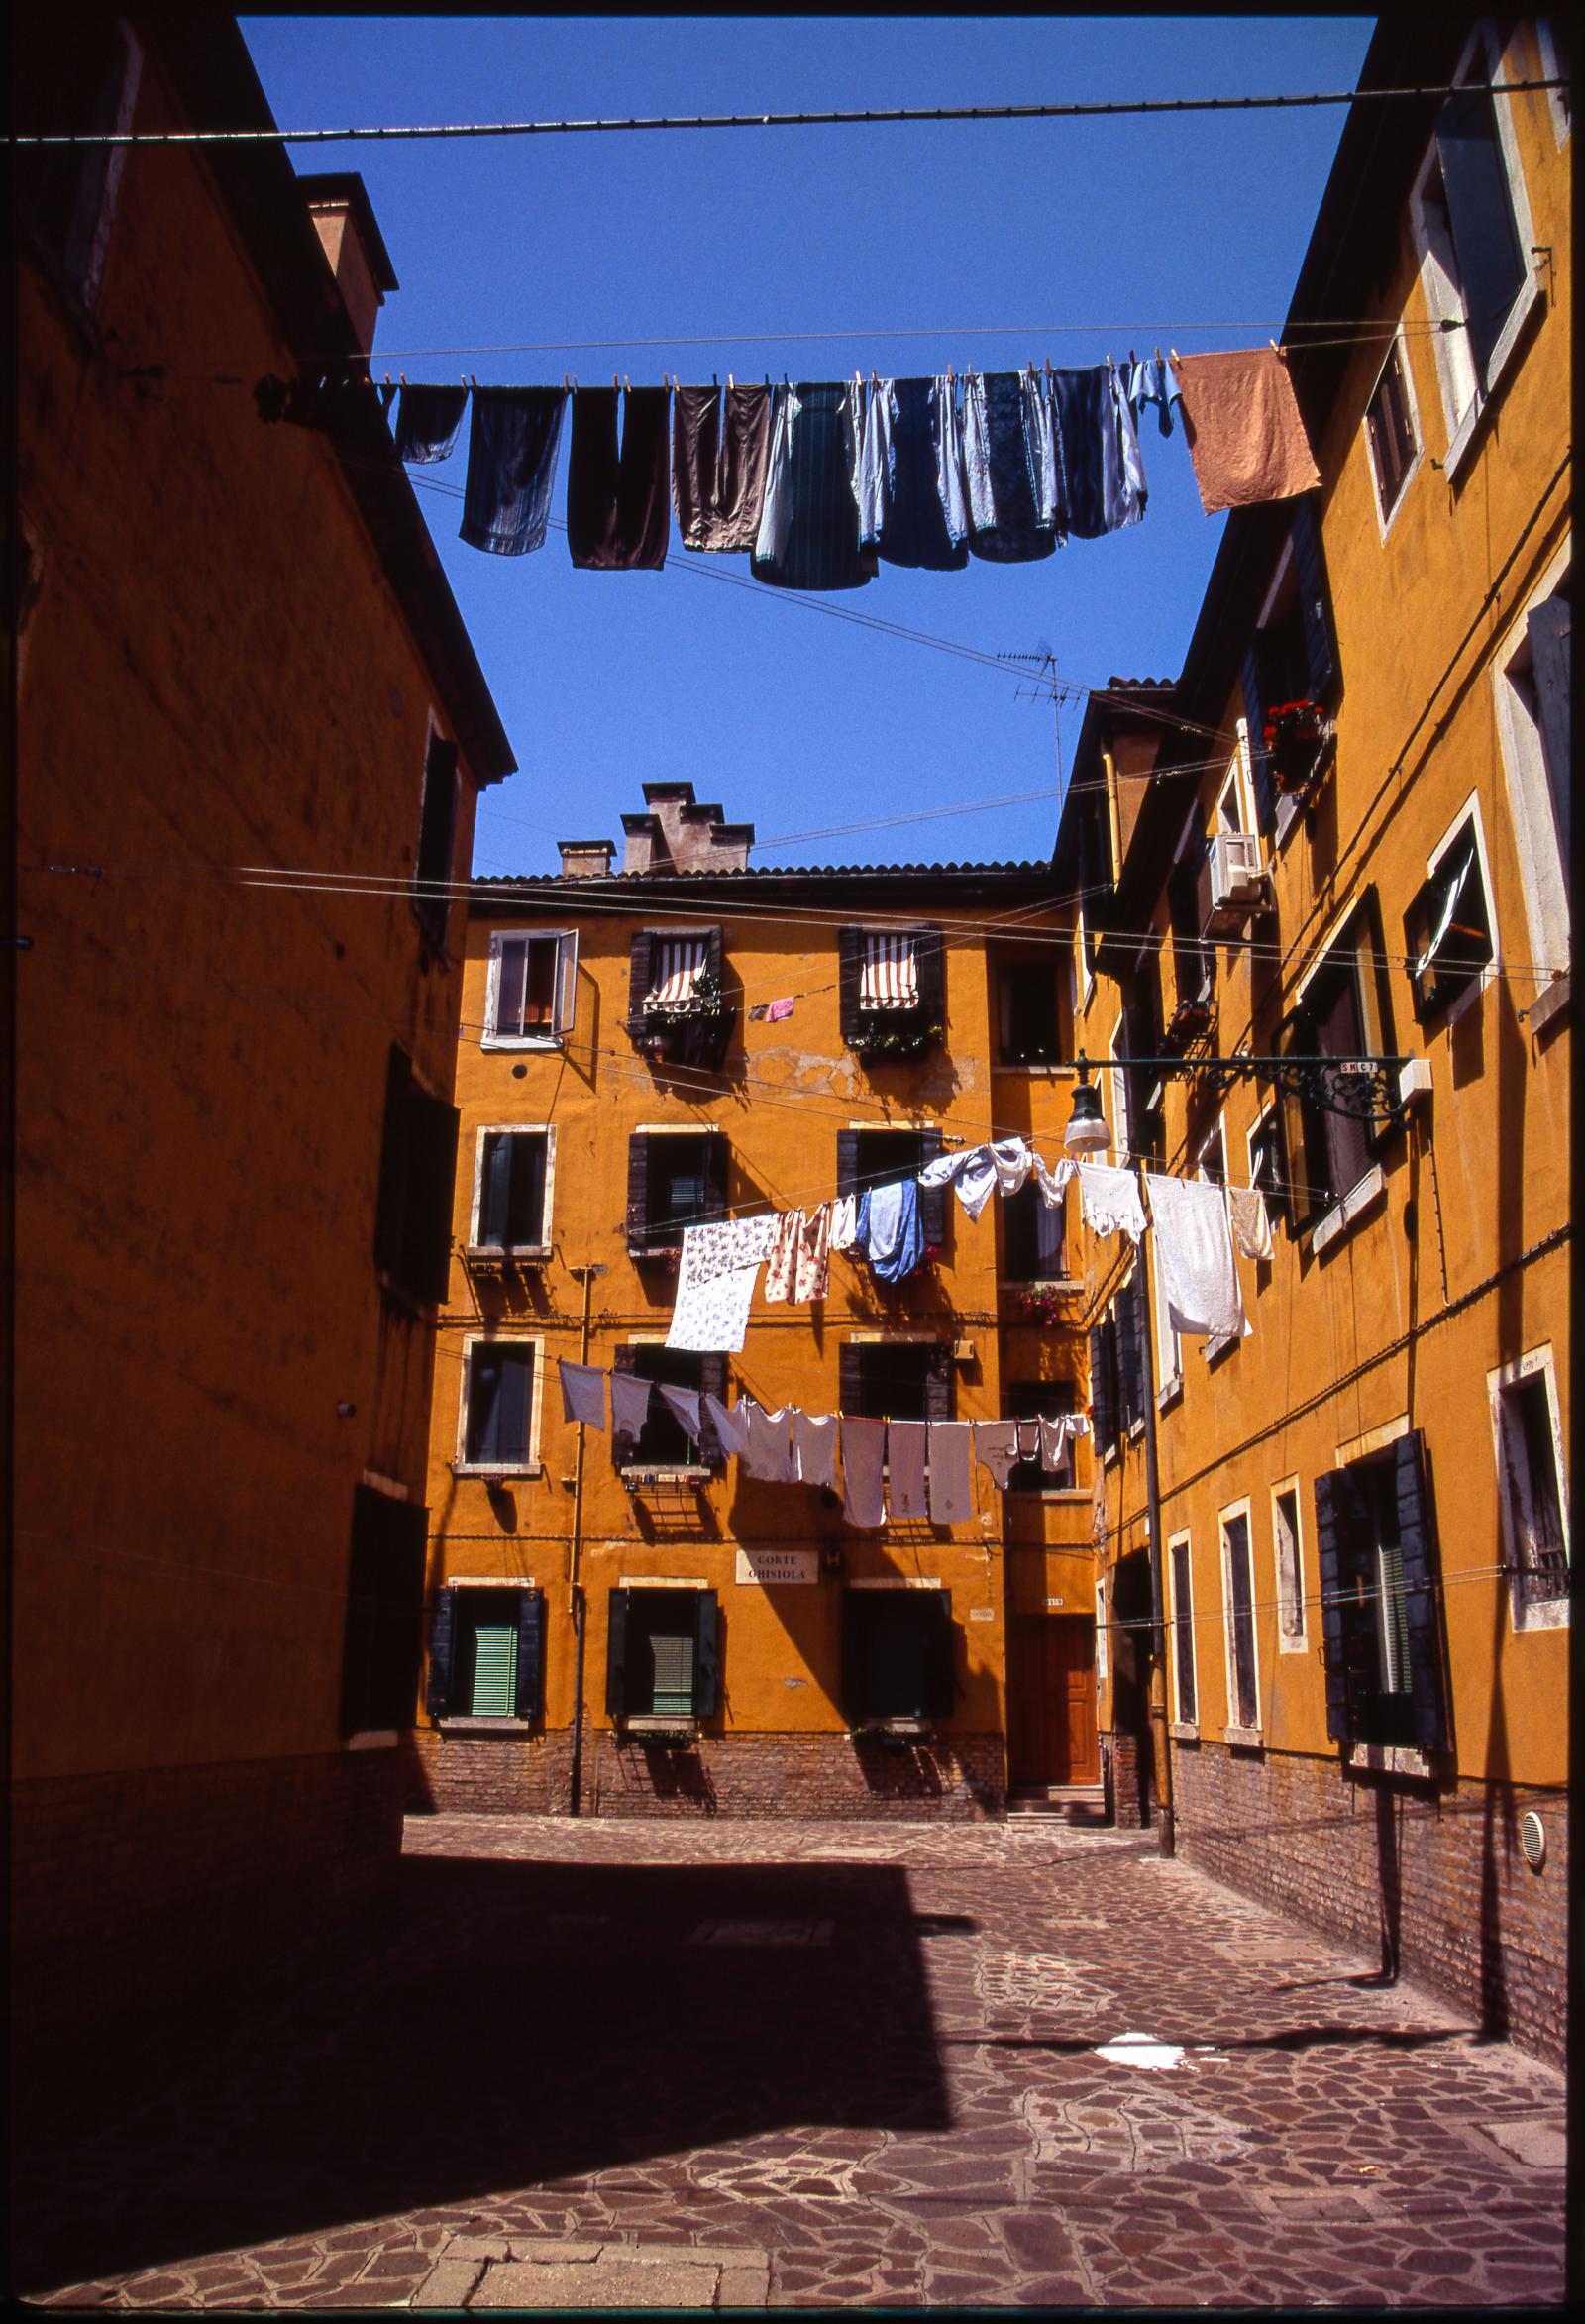 [Featured in Italian Vogue. The print will not display the watermark]

Edition 1/10 - Laundry in Venetian Courtyard, Venice, Italy , C-Type Photograph

Edition of 10 + 5 APs.
Front: Signature and edition number with artists blind stamp.  
Back: Ink